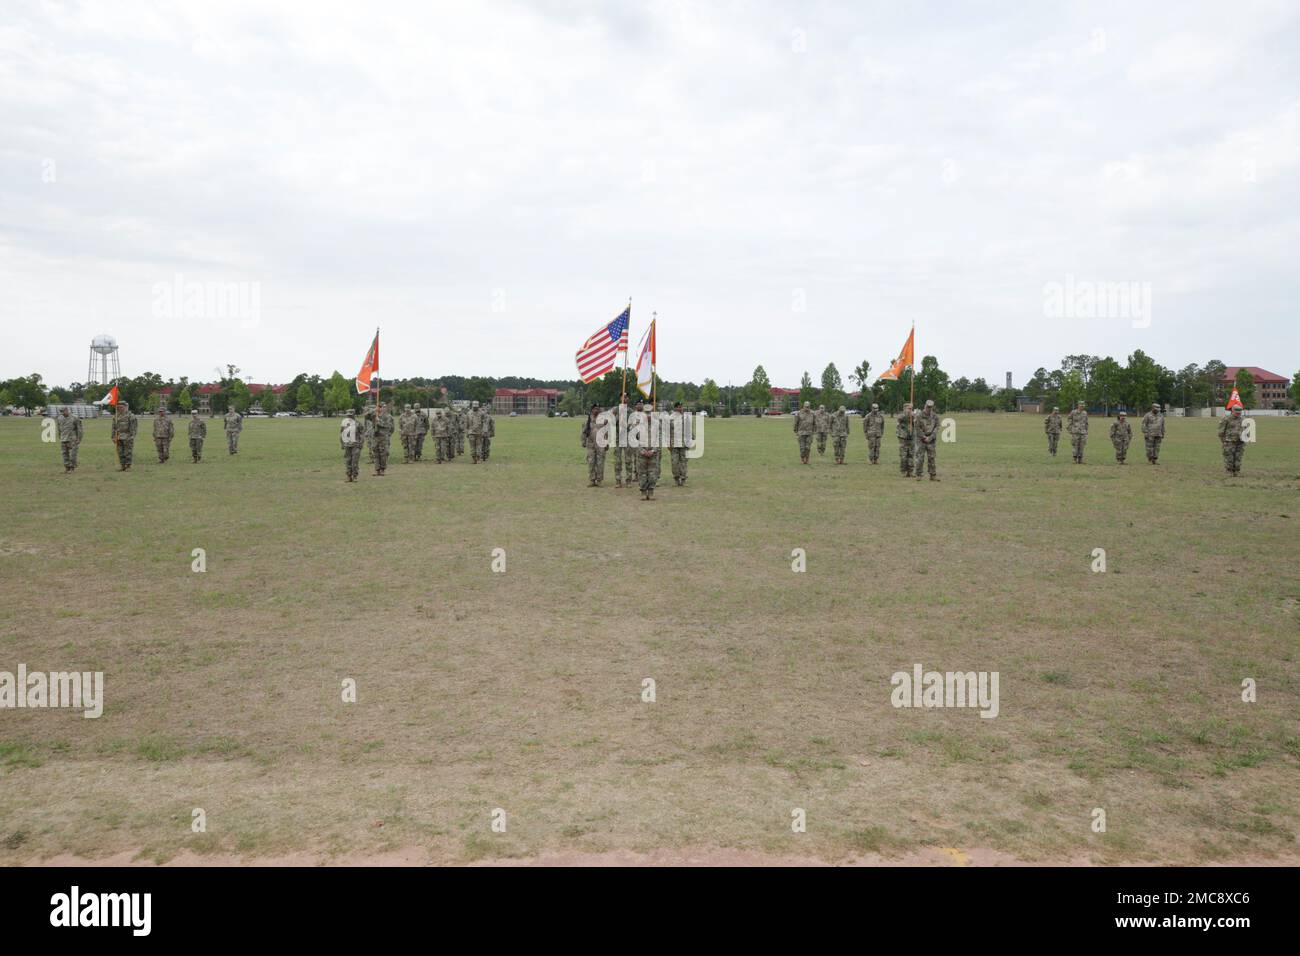 The 359th Theater Tactical Signal Brigade conducted a change of command ceremony on Barton Field on Fort Gordon in Augusta, Ga on June 26, 2022. Col. Travis A. Hartman relinquished command of the 359th TTSB to Col. Tracy G. Monteith, ceremony was presided over by Major. Gen. John H. Phillips,  commanding general, 335th Signal Command Theater. Stock Photo